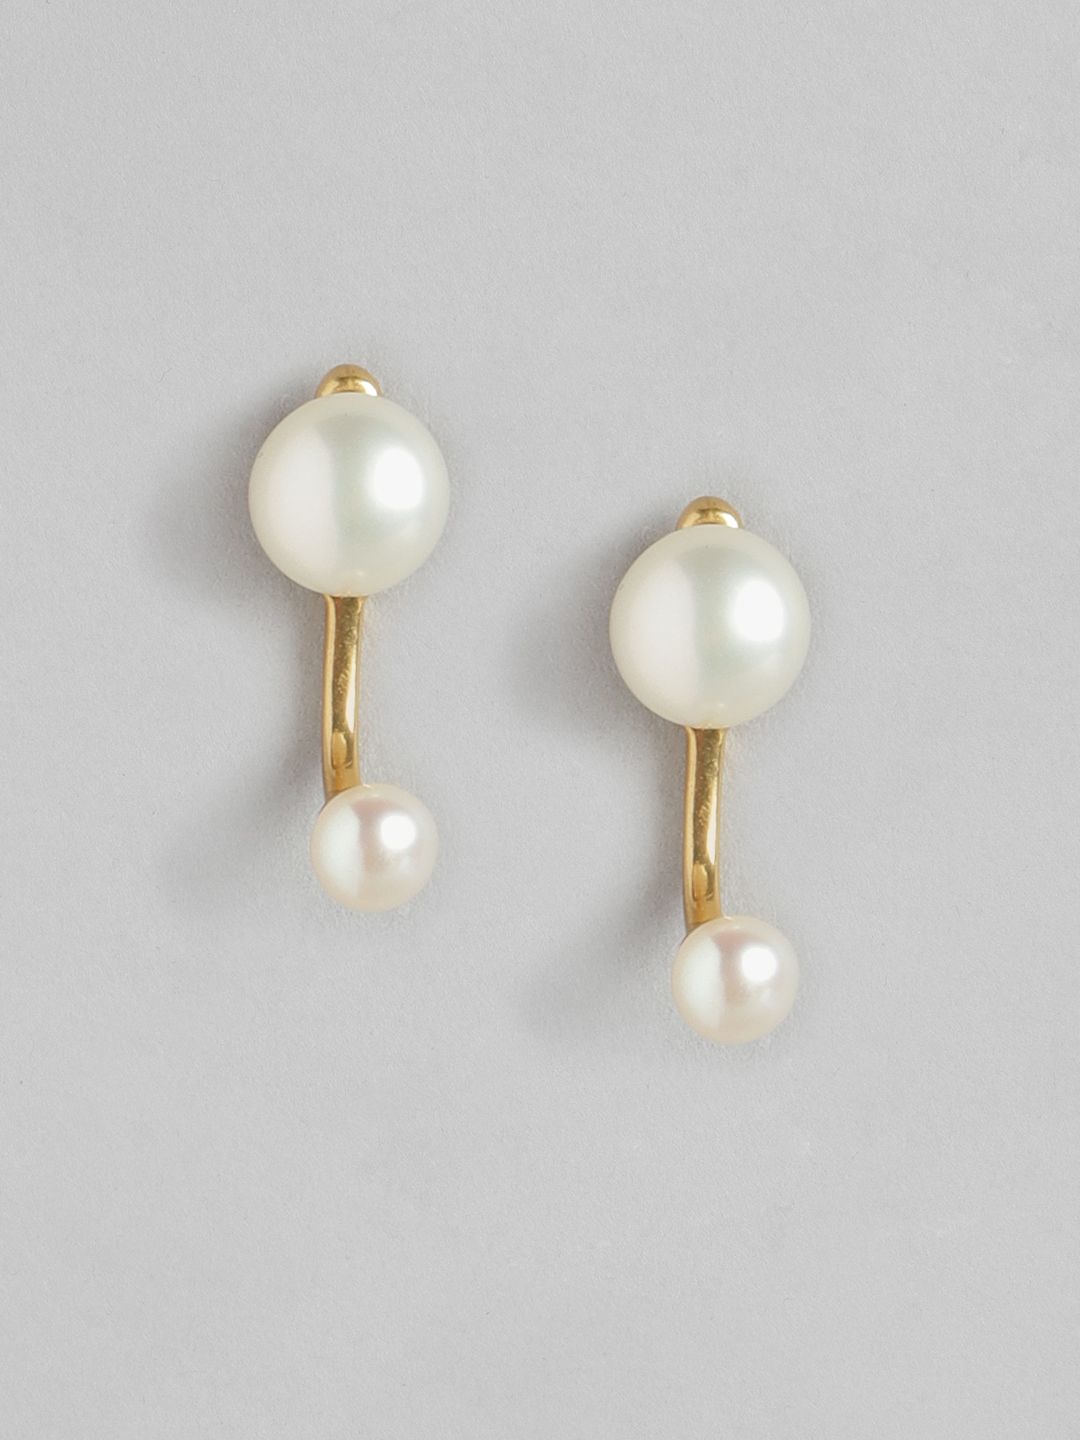 Carlton London Gold-Toned & White Contemporary Studs Earrings Price in India